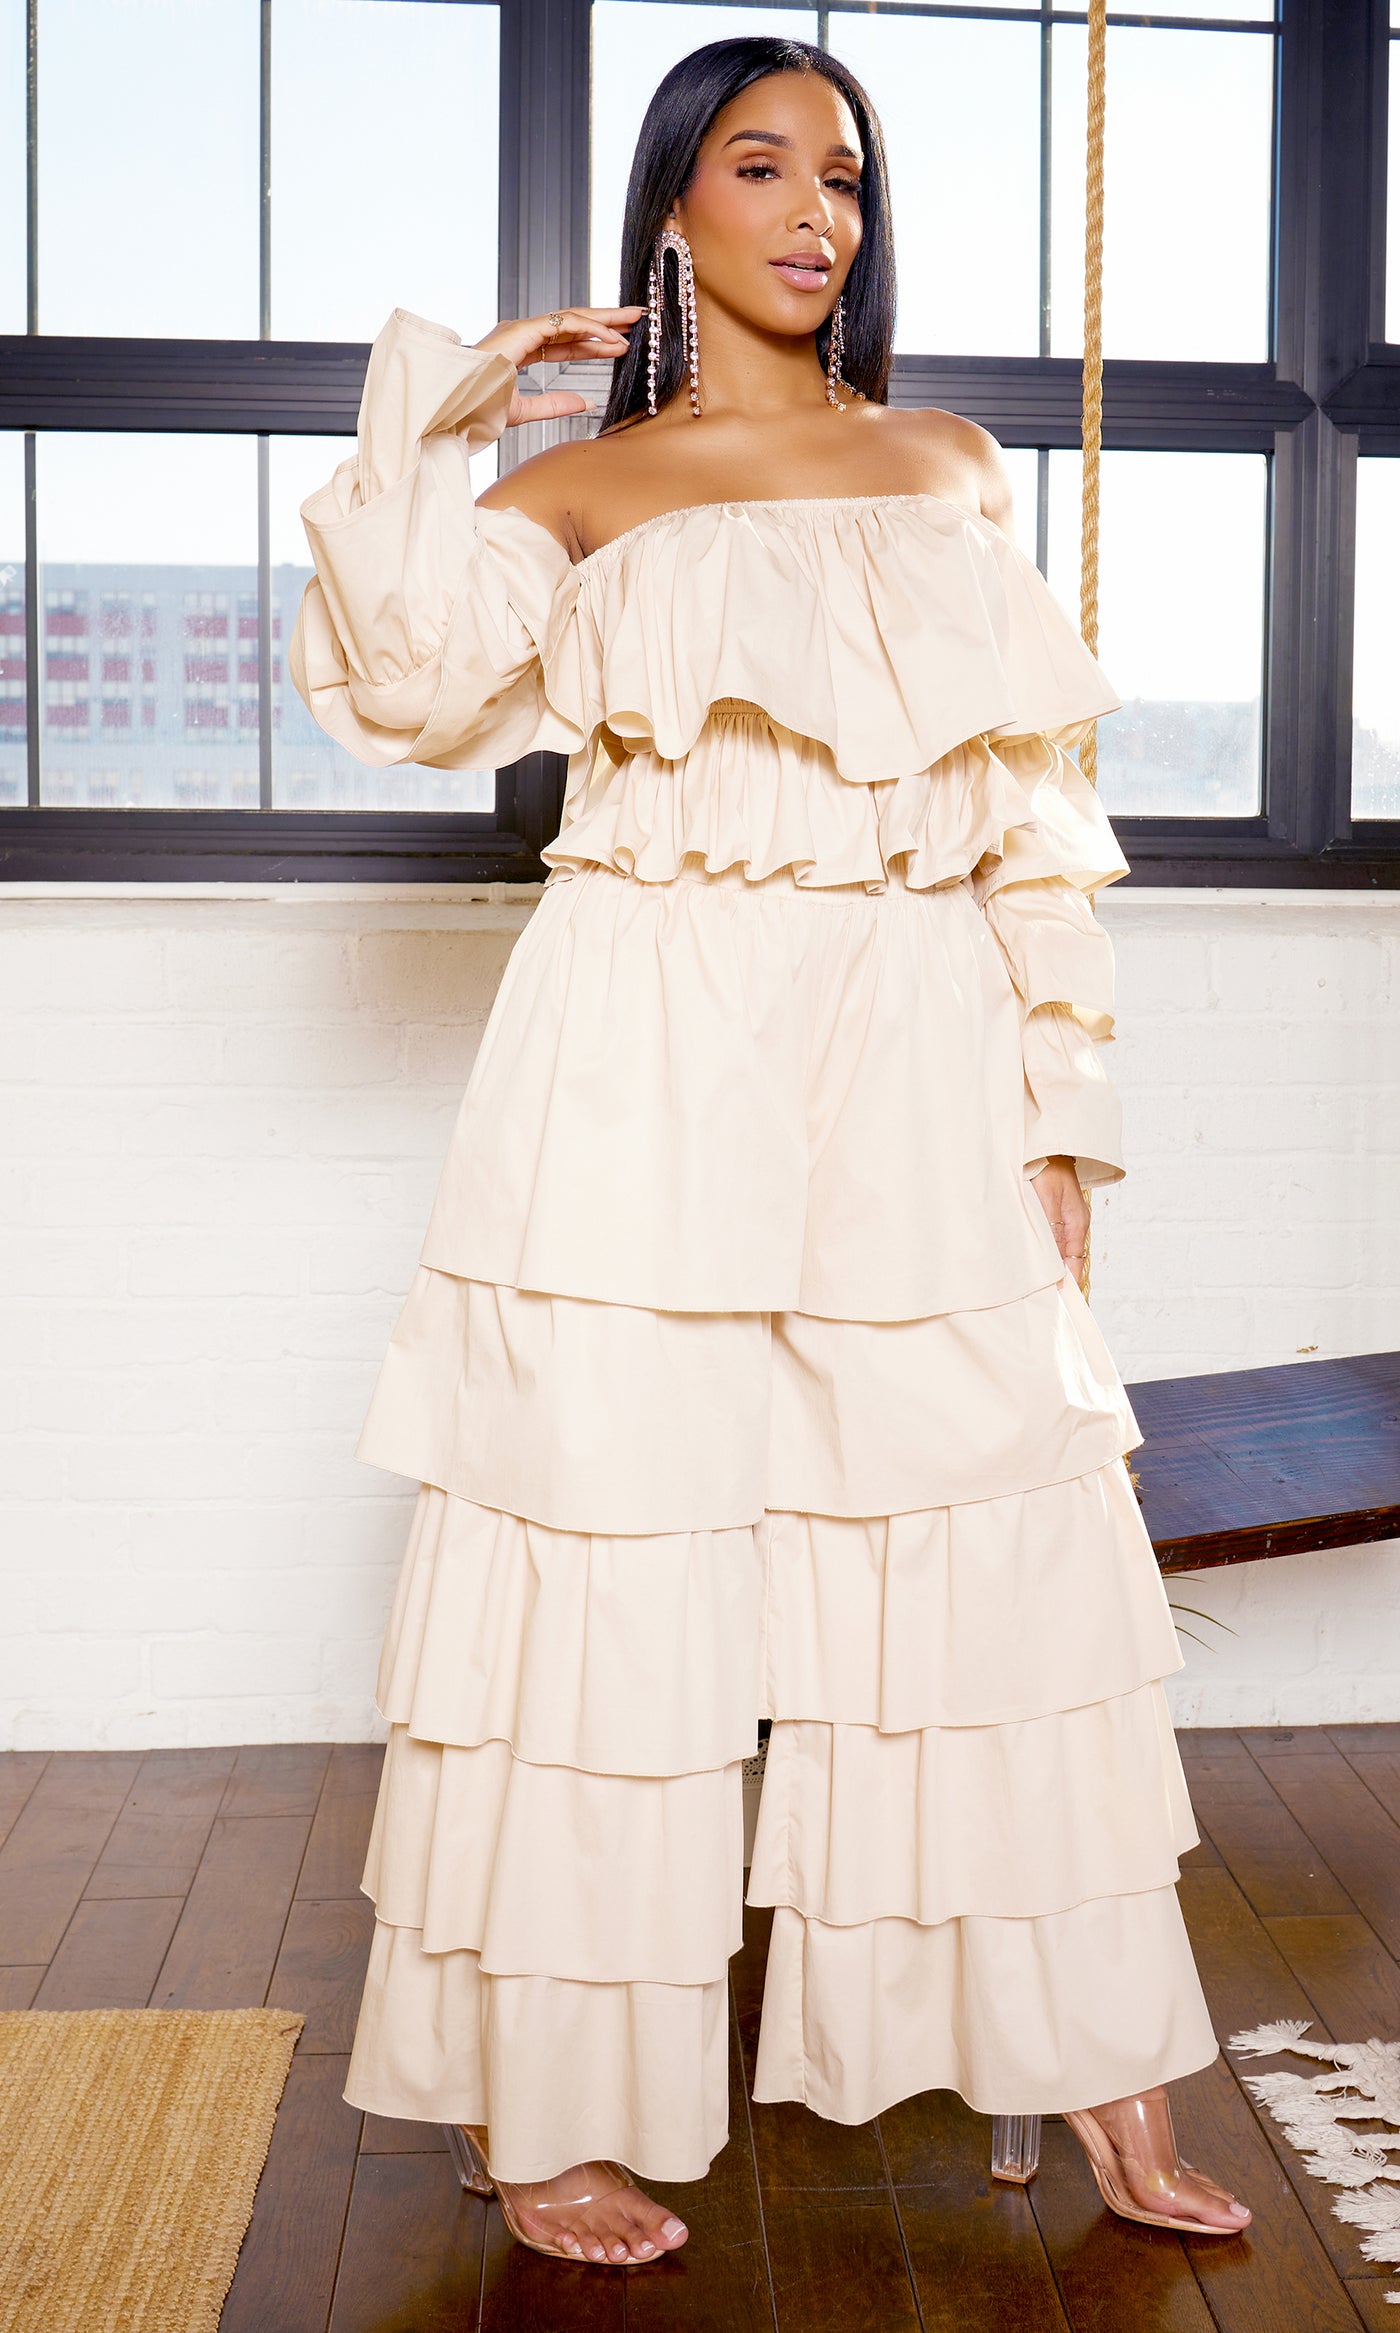 Tiered Ruffle Poplin Pants Set - Light Tan PREORDER Ships End April - Cutely Covered